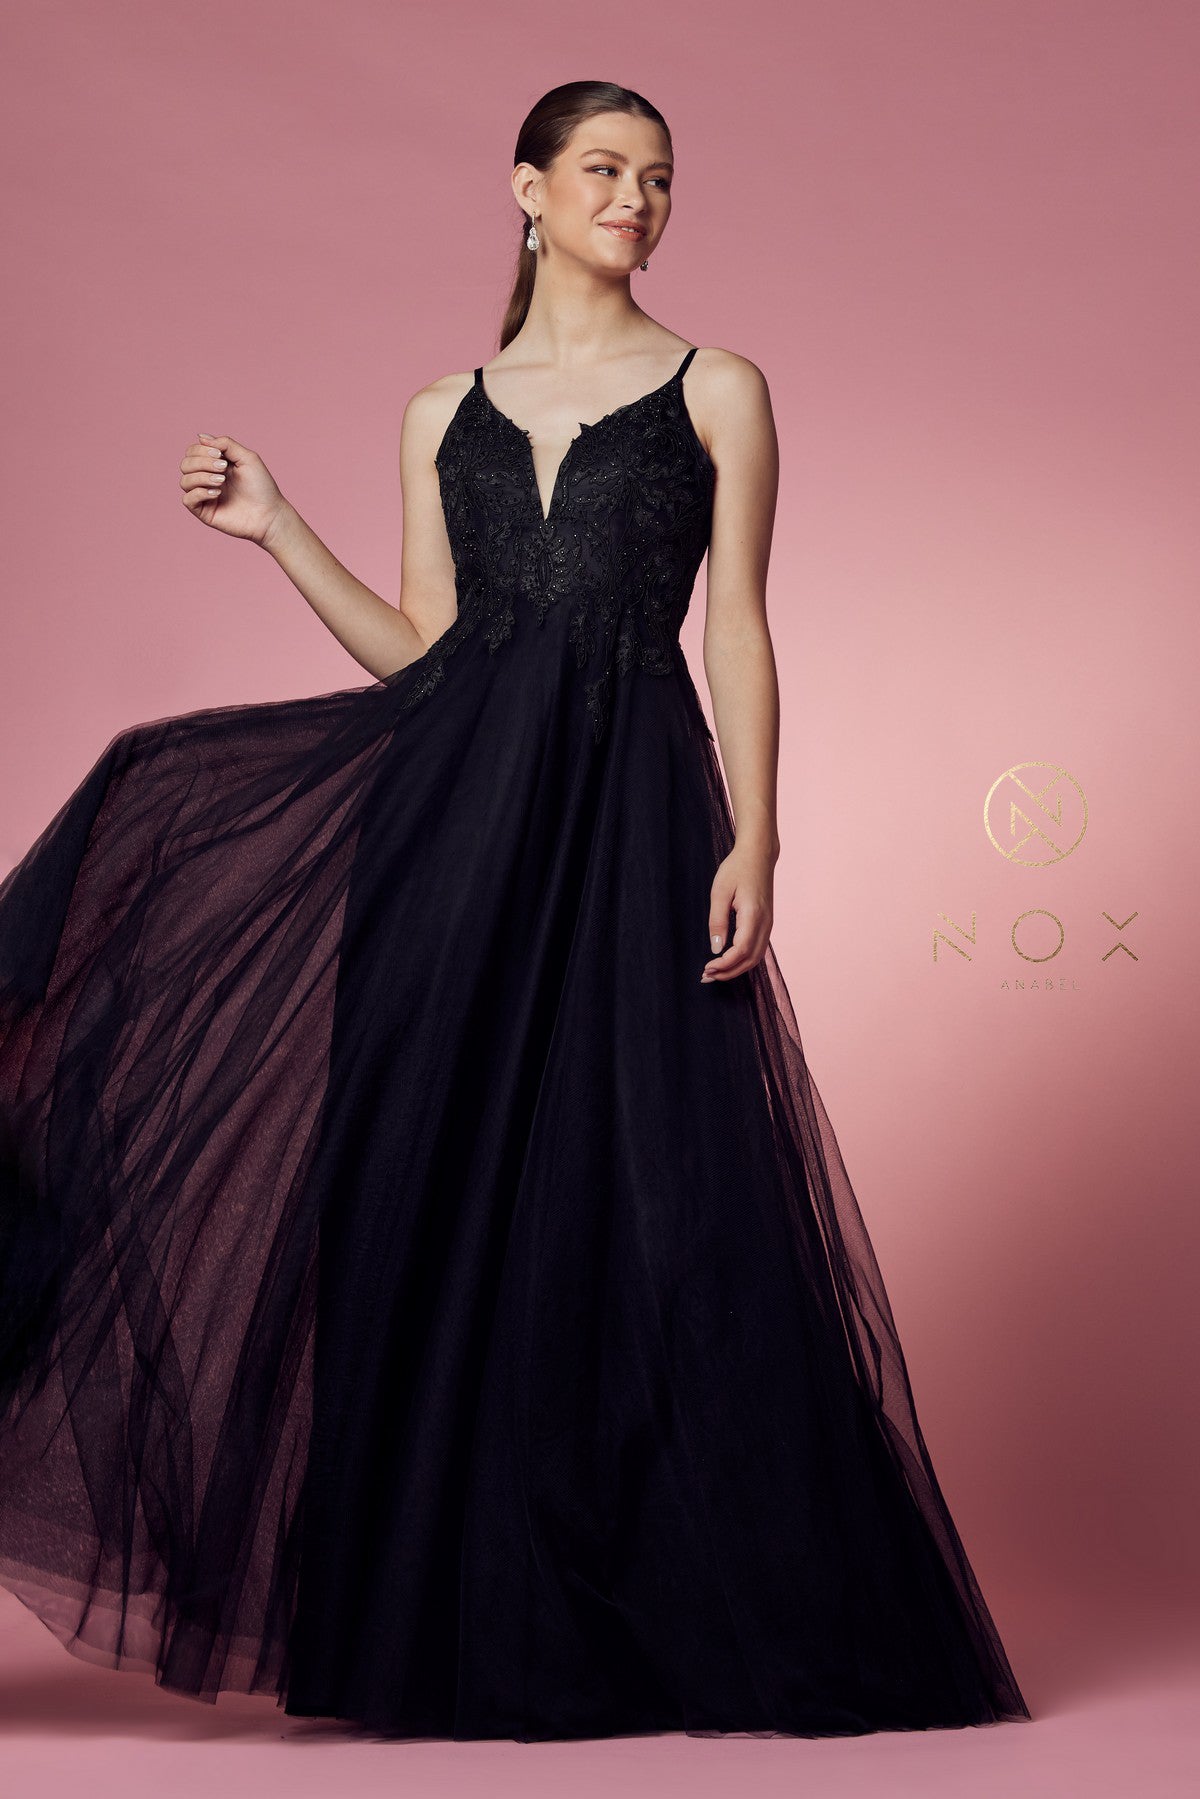 Embroidered Tulle A-Line Floor Length Net Gown by Nox Anabel -R357